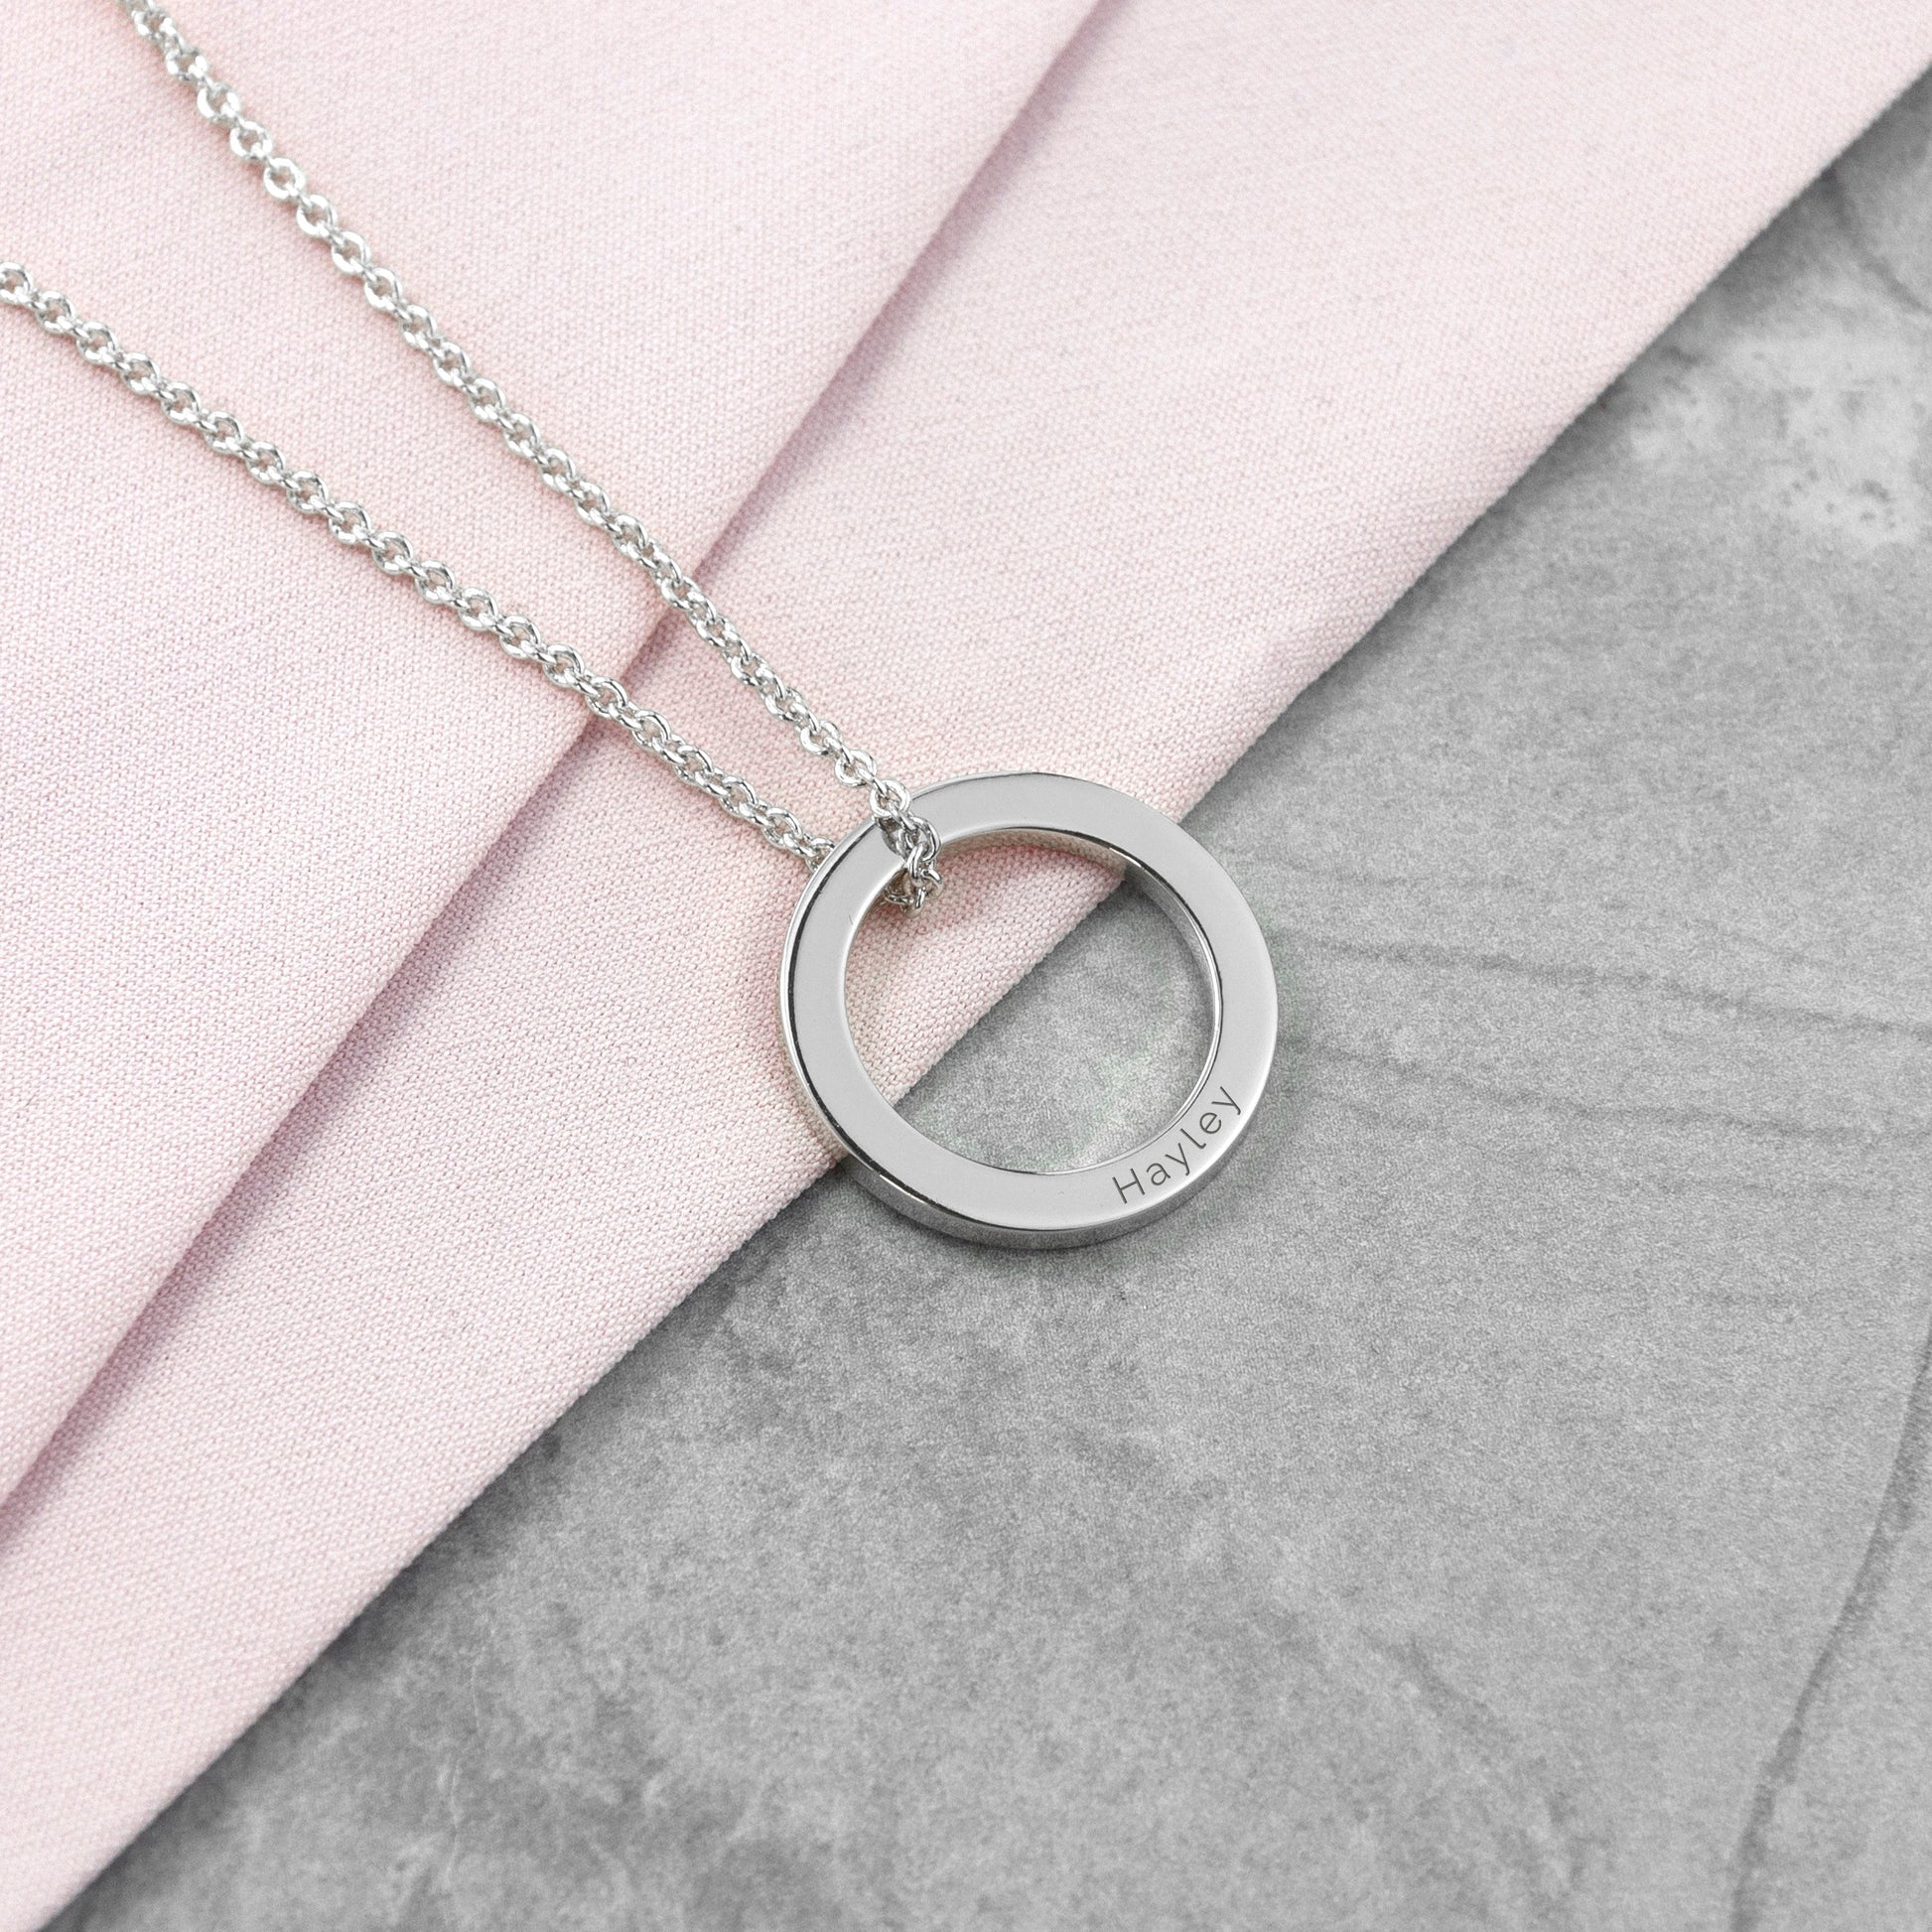 Personalized Necklaces - Personalized Family Ring Necklace 